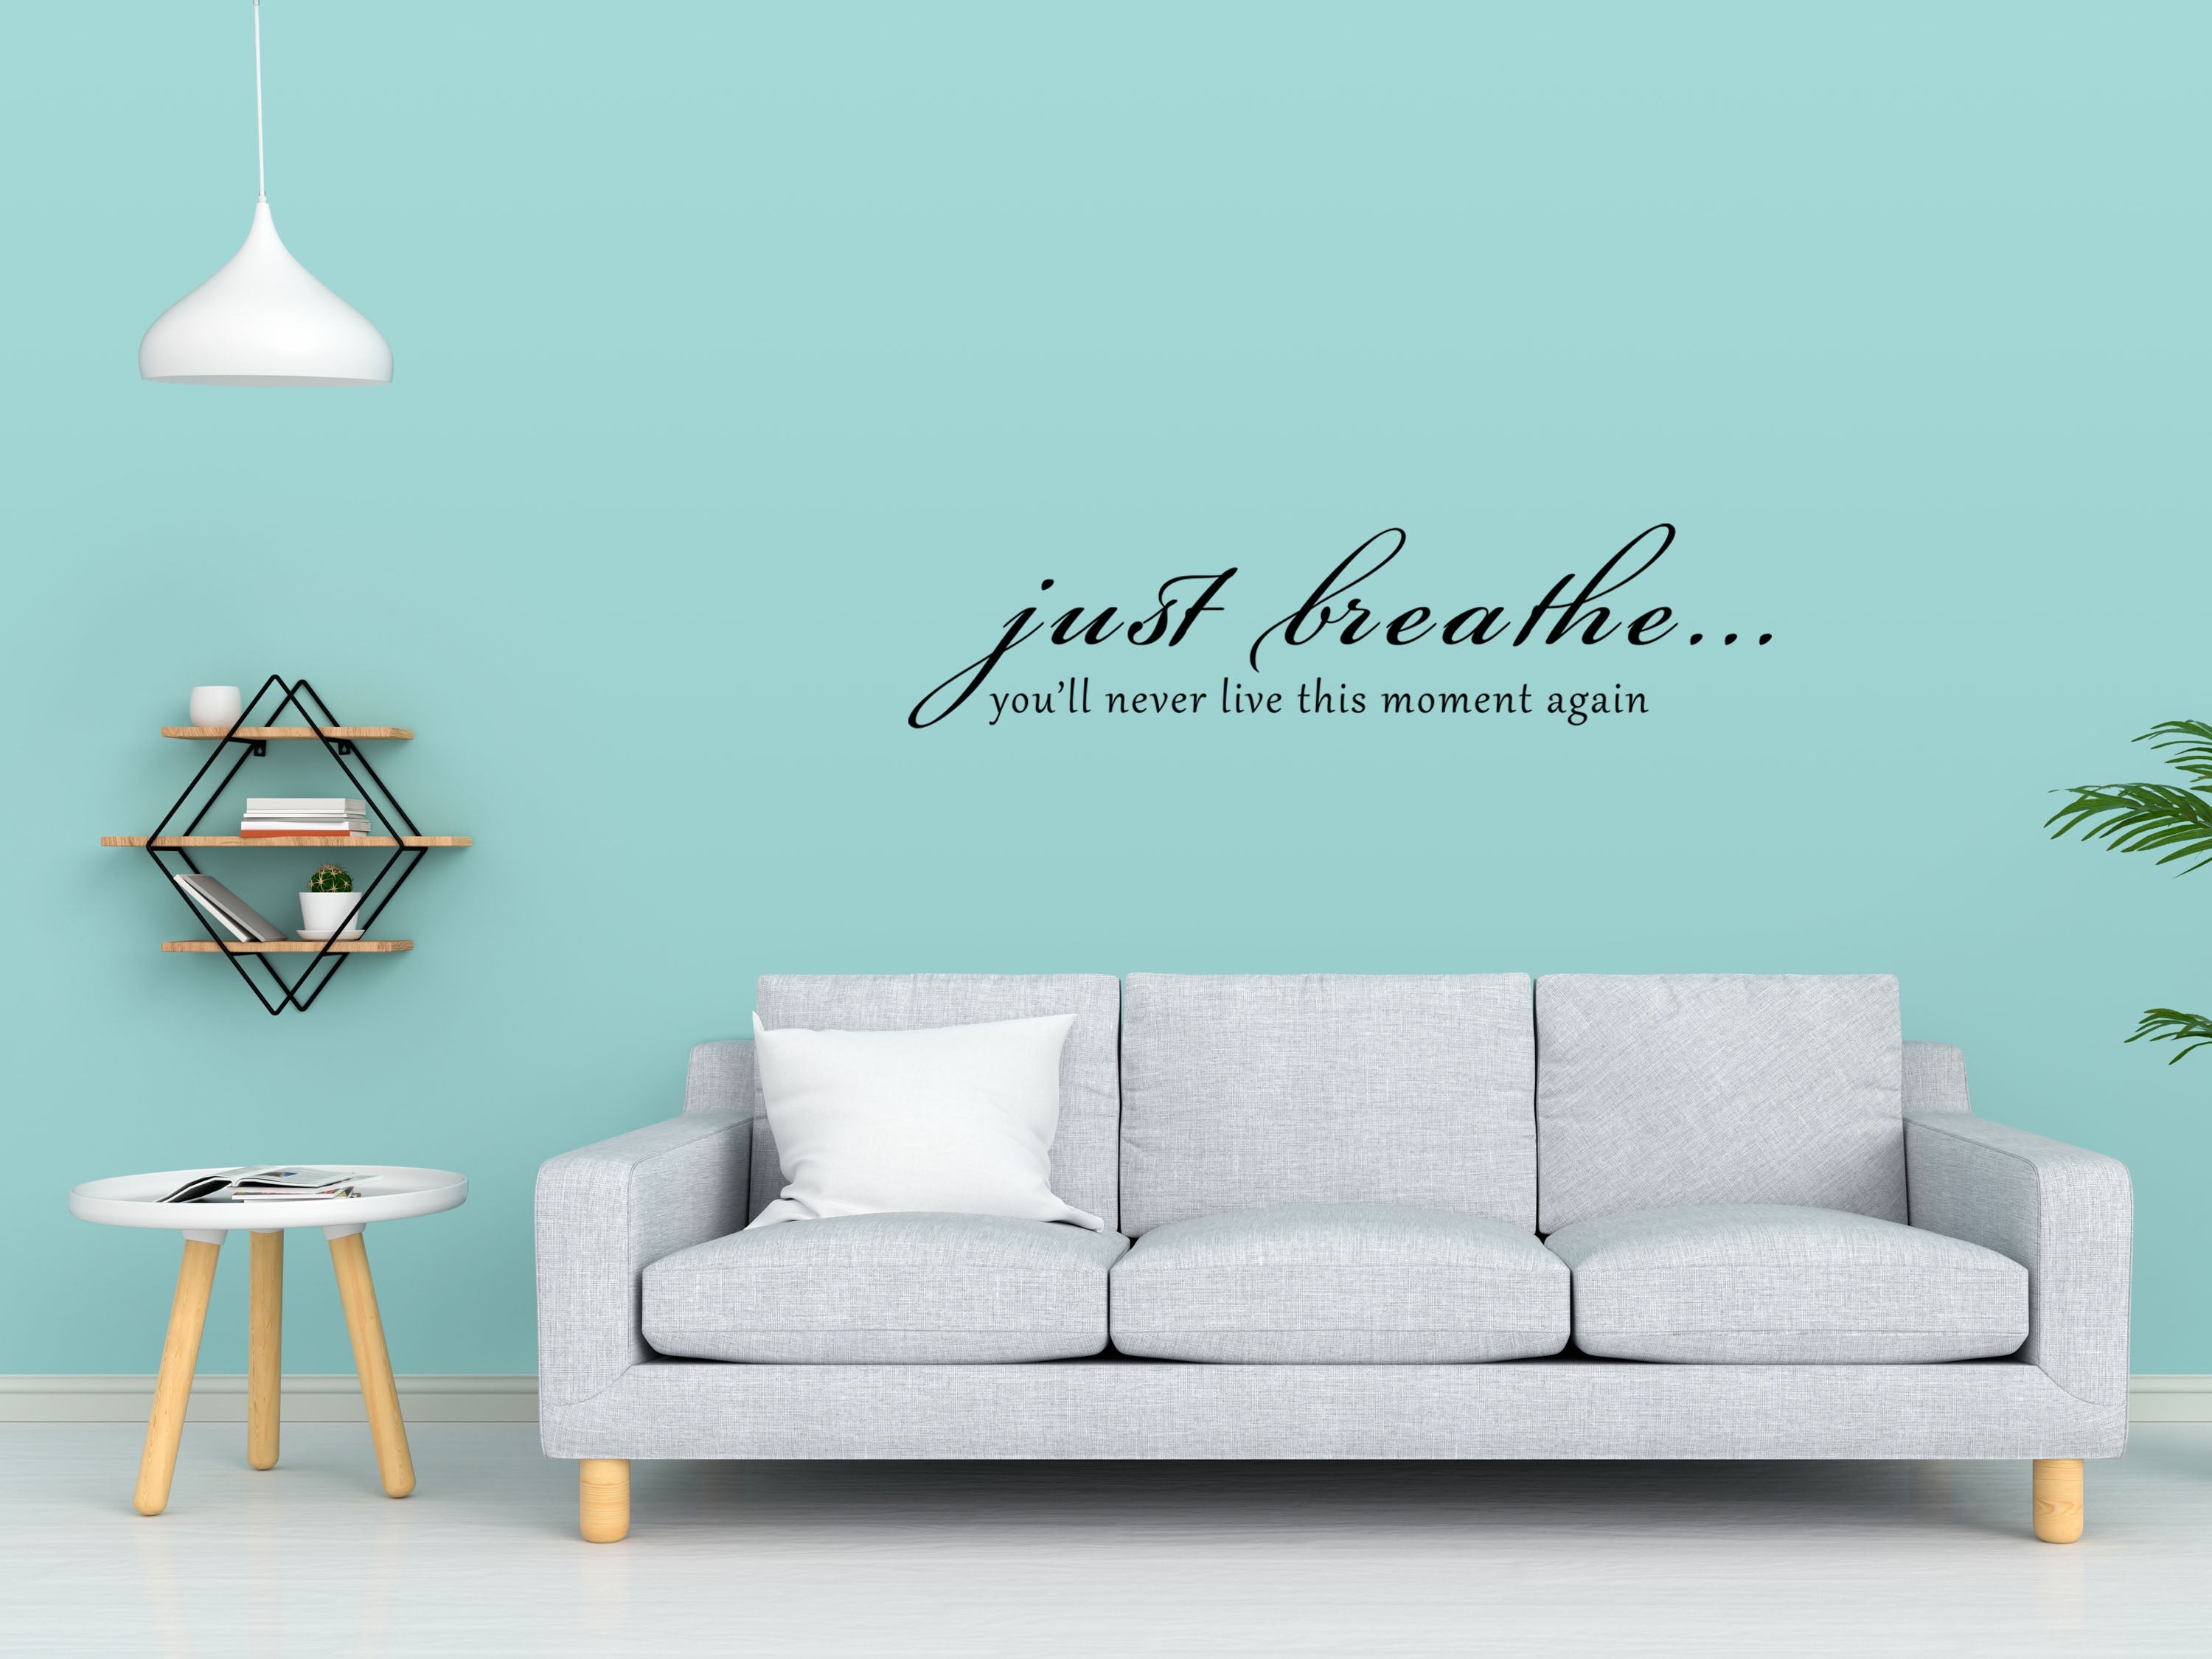 Vinyl Wall Decal Inspiring Quote Just Breathe Stickers 28.5 in x 5 in gz075 